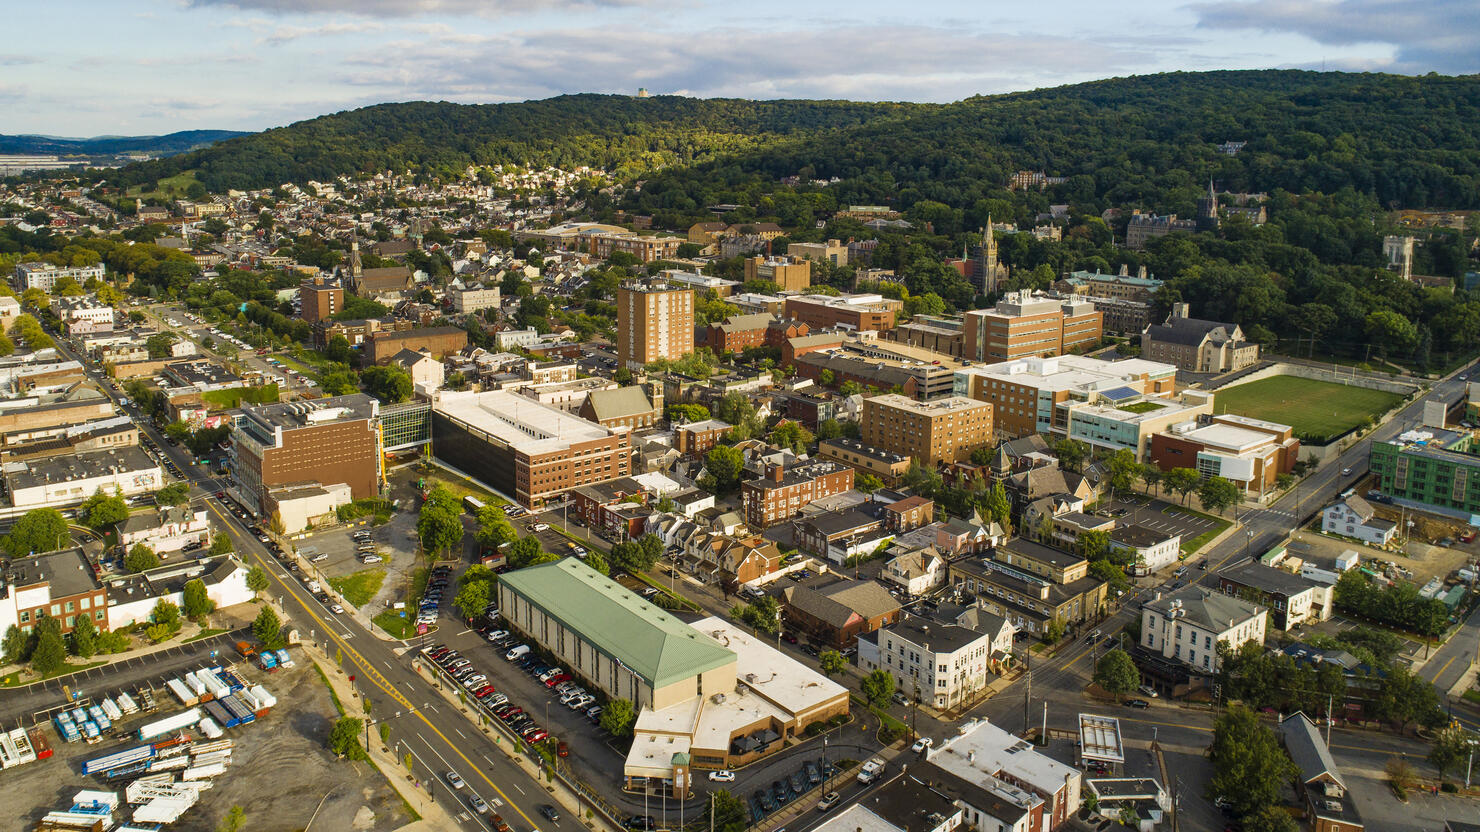 The panoramic aerial view of Bethlehem - the city in Pennsylvania, in Appalachian mountains on the Lehigh River